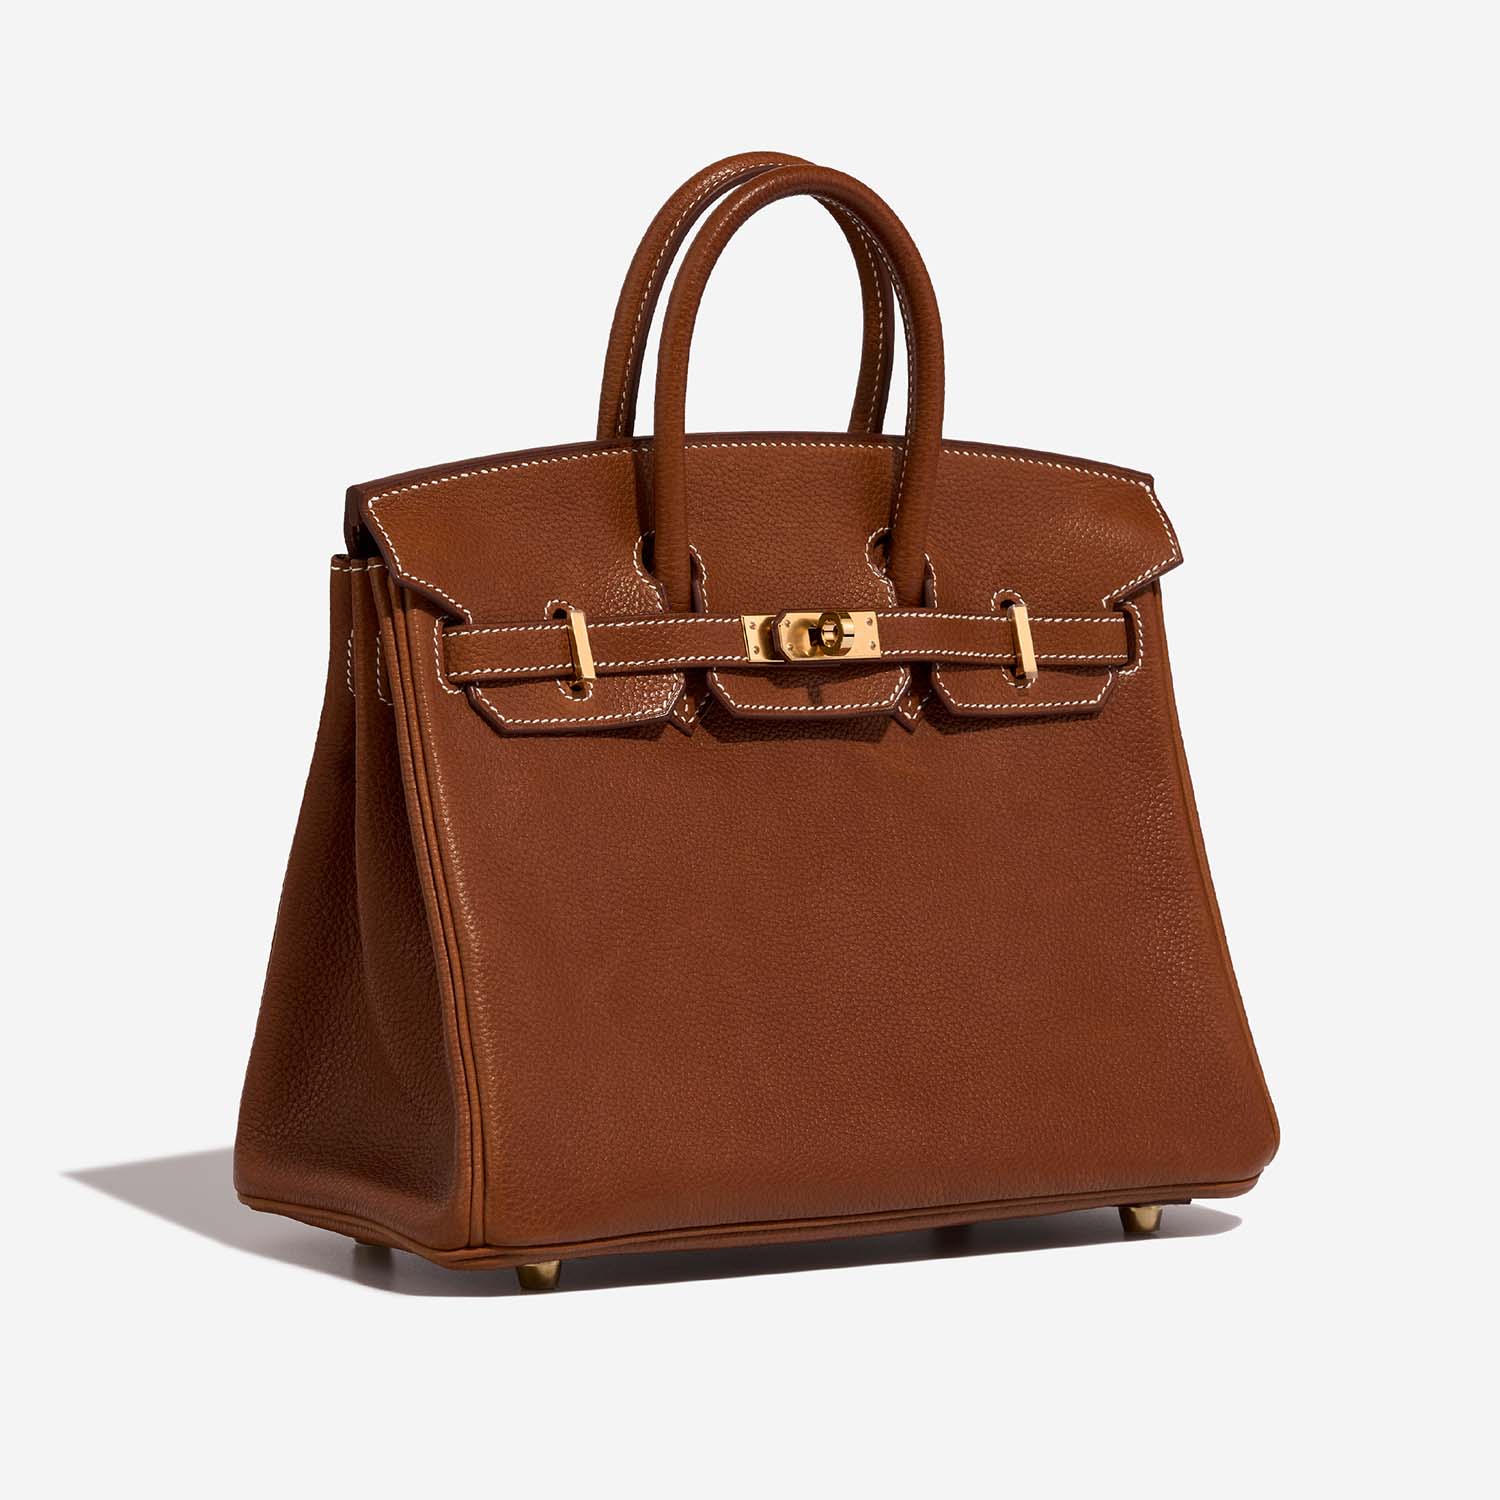 Fun facts about our new Barenia leather Birkin 25 🚨collector bag